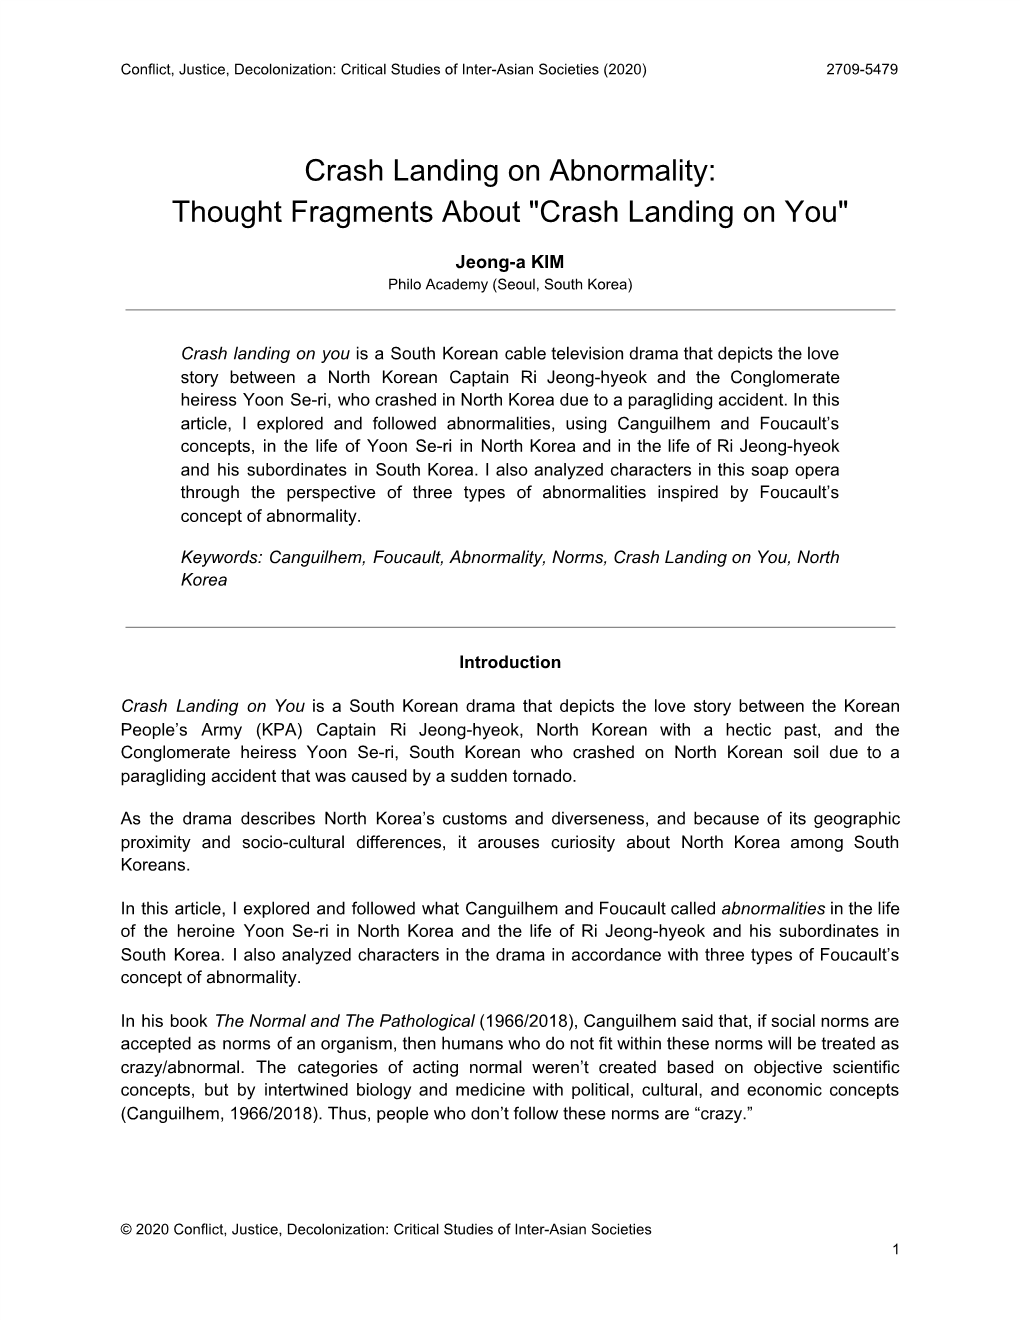 Crash Landing on Abnormality: Thought Fragments About "Crash Landing on You"